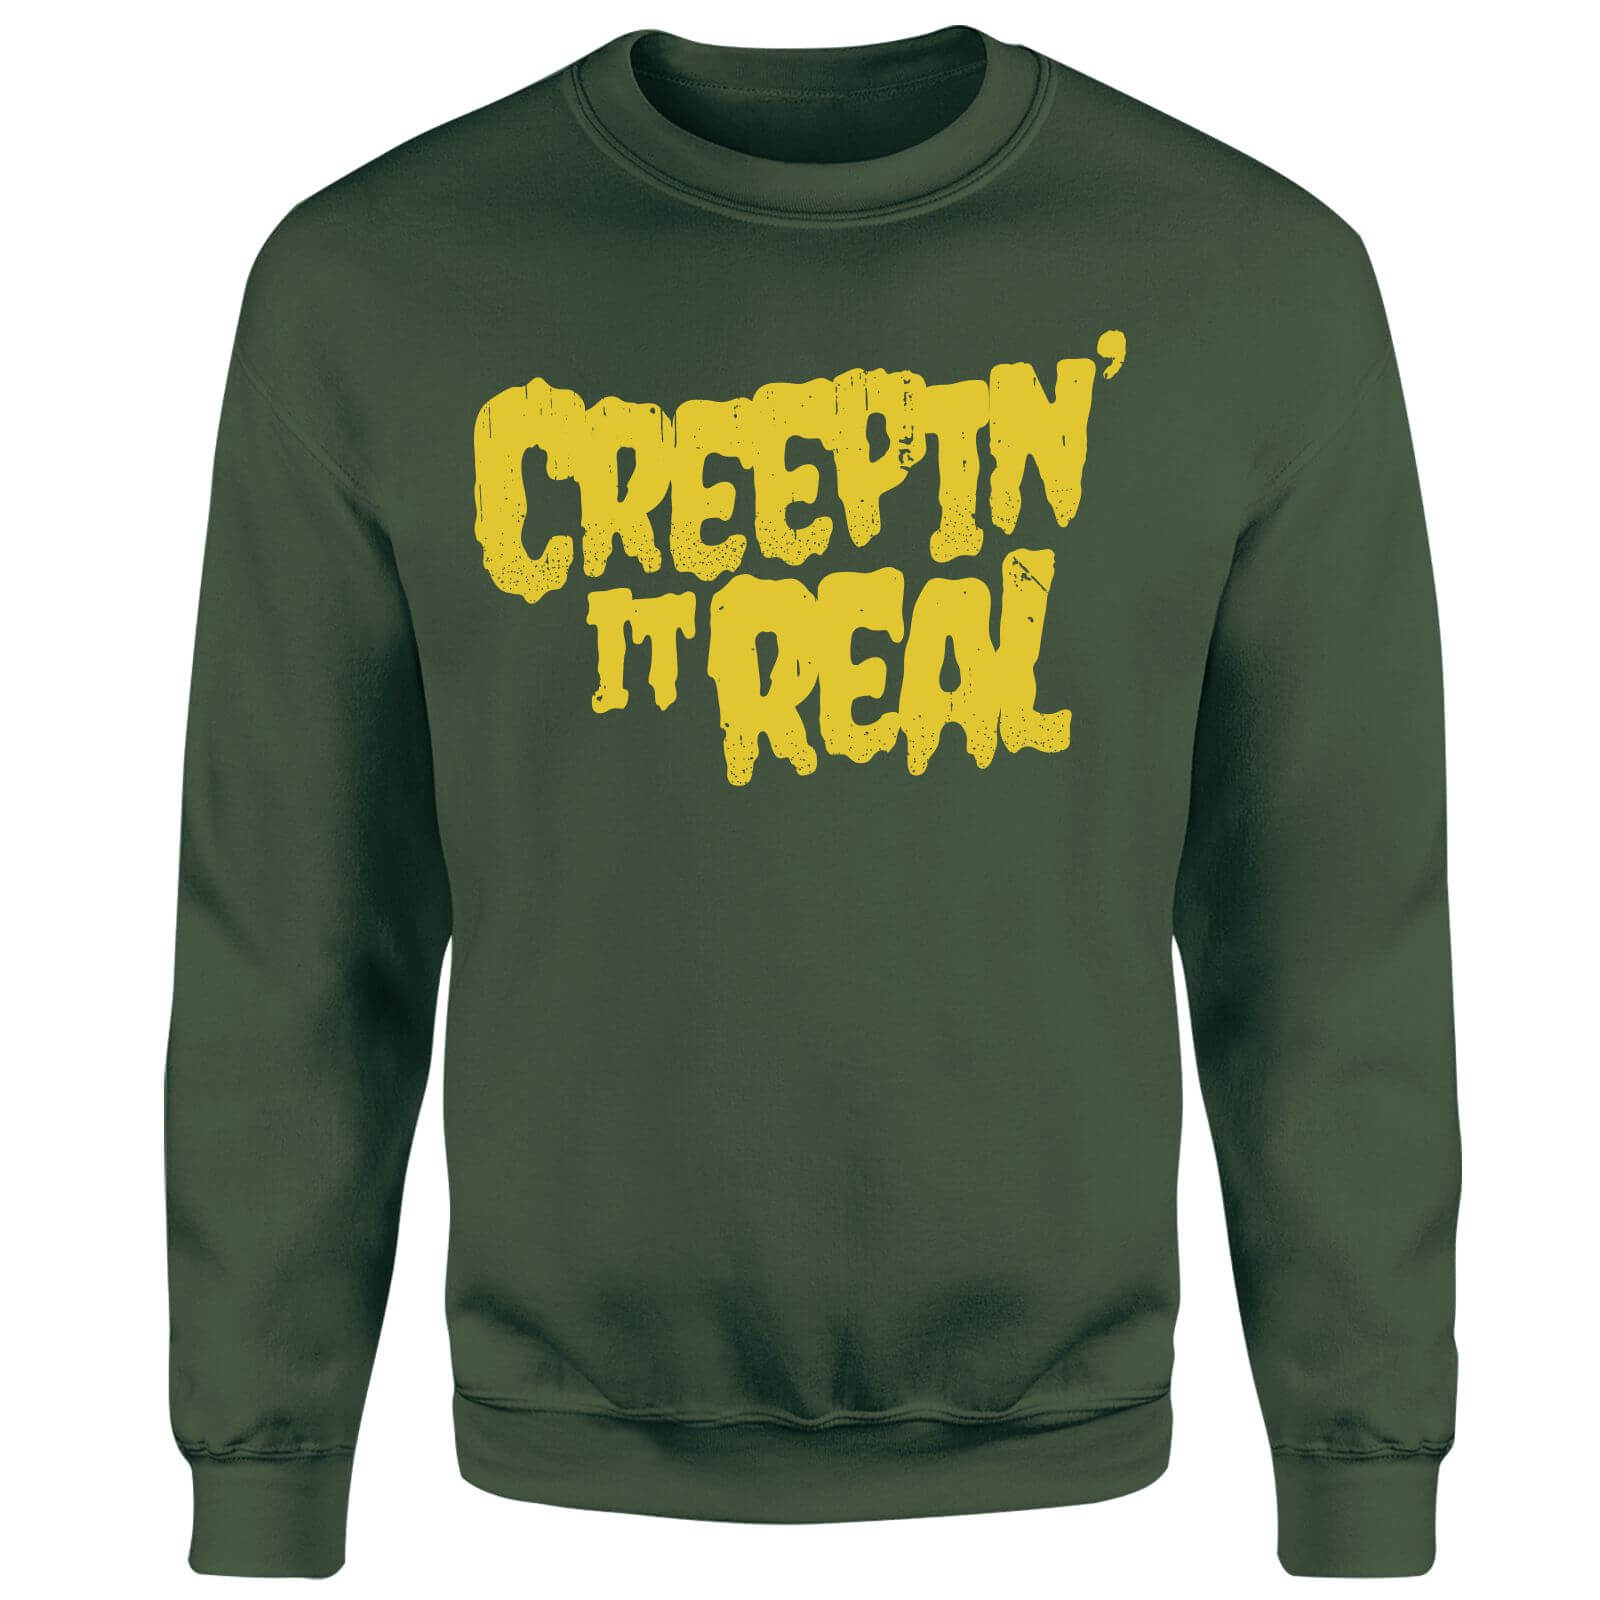 Creepin It Real Sweatshirt - Forest Green - M - Forest Green